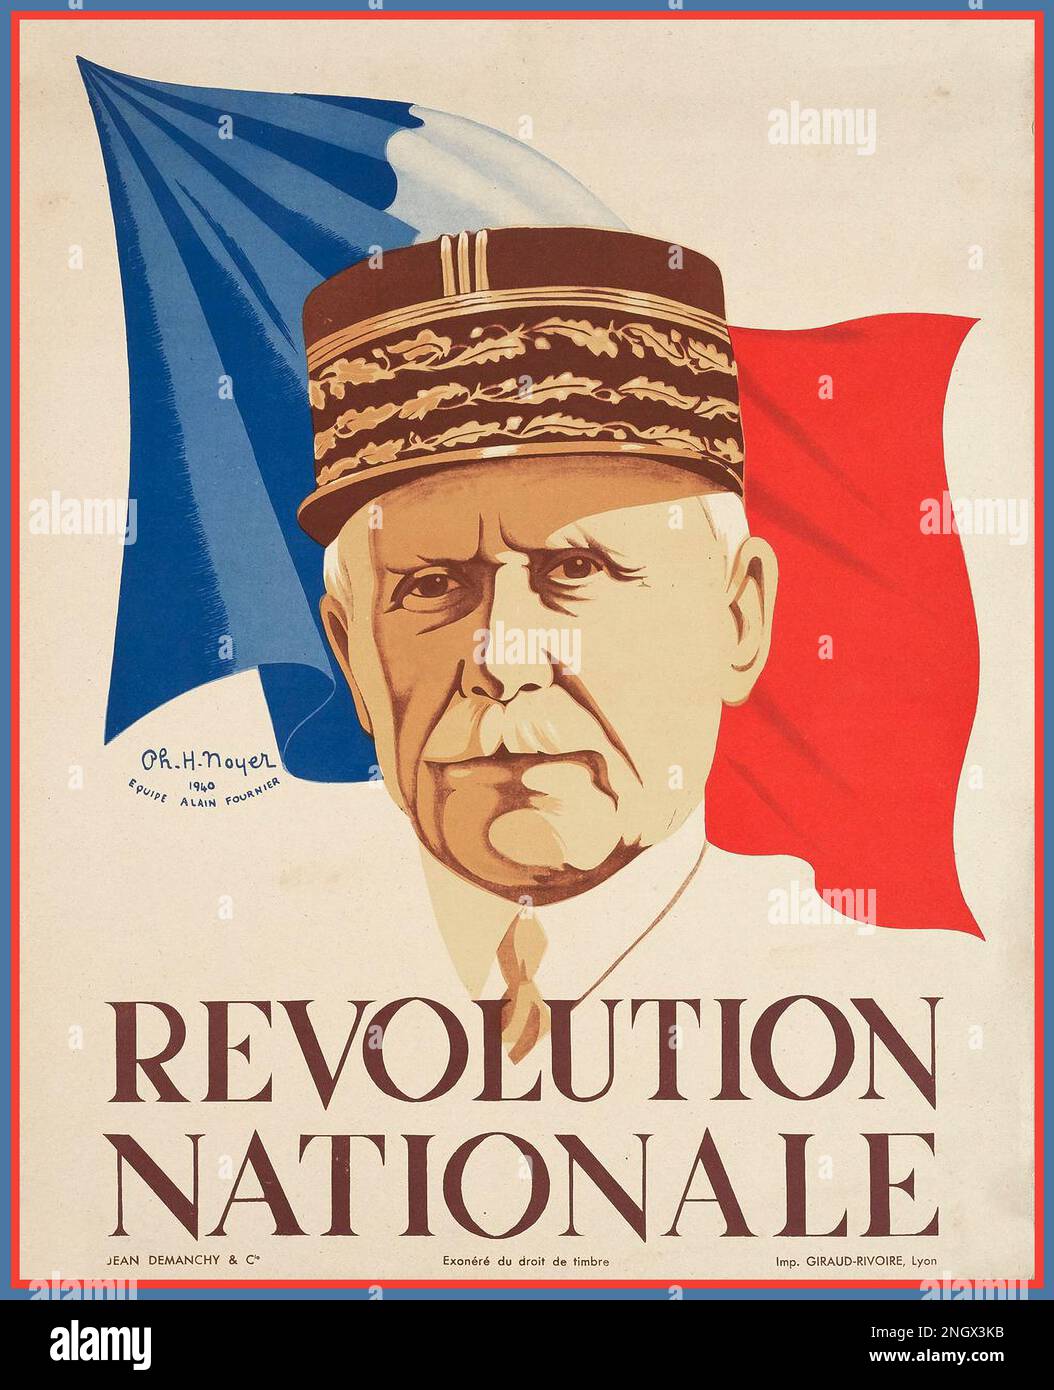 WW2 Vichy France Marshall Petain Propaganda Poster Wartime propaganda poster depicting the bust of the dictator of the Nazi puppet state in France, Maréchal Philippe Pétain of the so-called Vichy government, in front of the Tricolore, the French national flag. The slogan Revolution Nationale denotes the far-right ideological programme attempted by the collaborationist régime after the defeat and occupation of France by Nazi Germany. 1940 Stock Photo